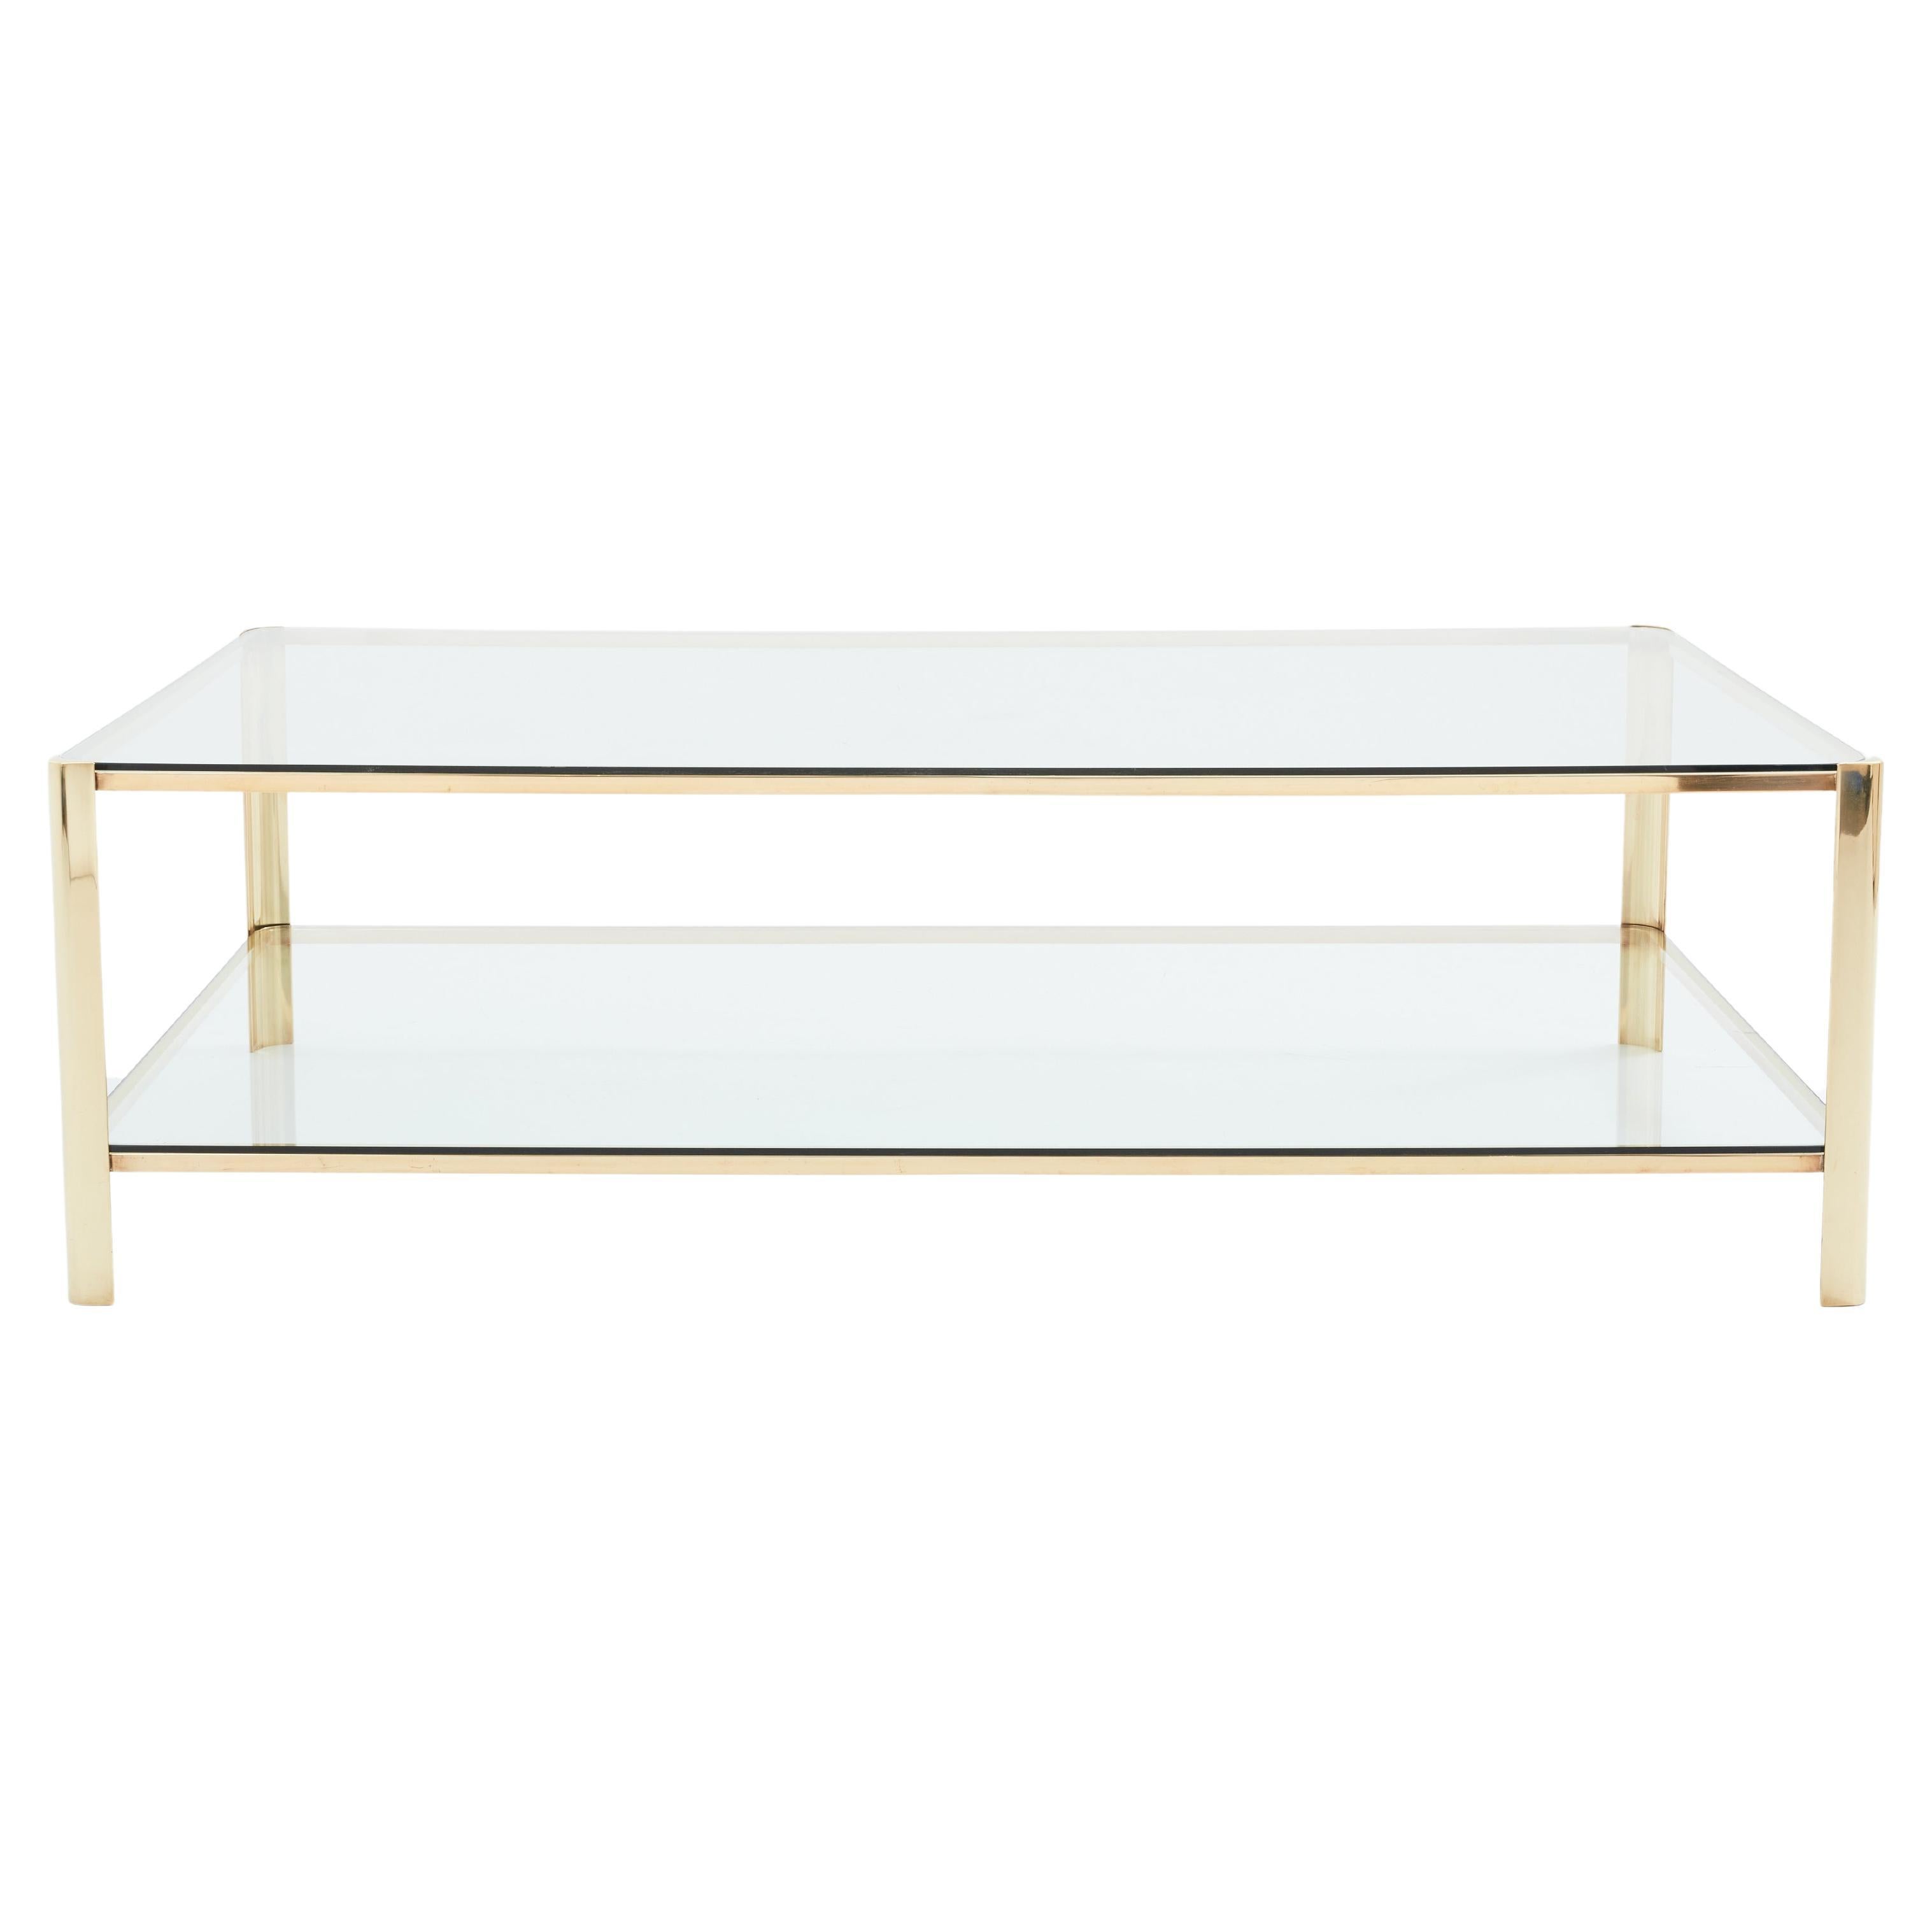 Two-tier Bronze coffee table by Jacques Quinet for Broncz 1960s